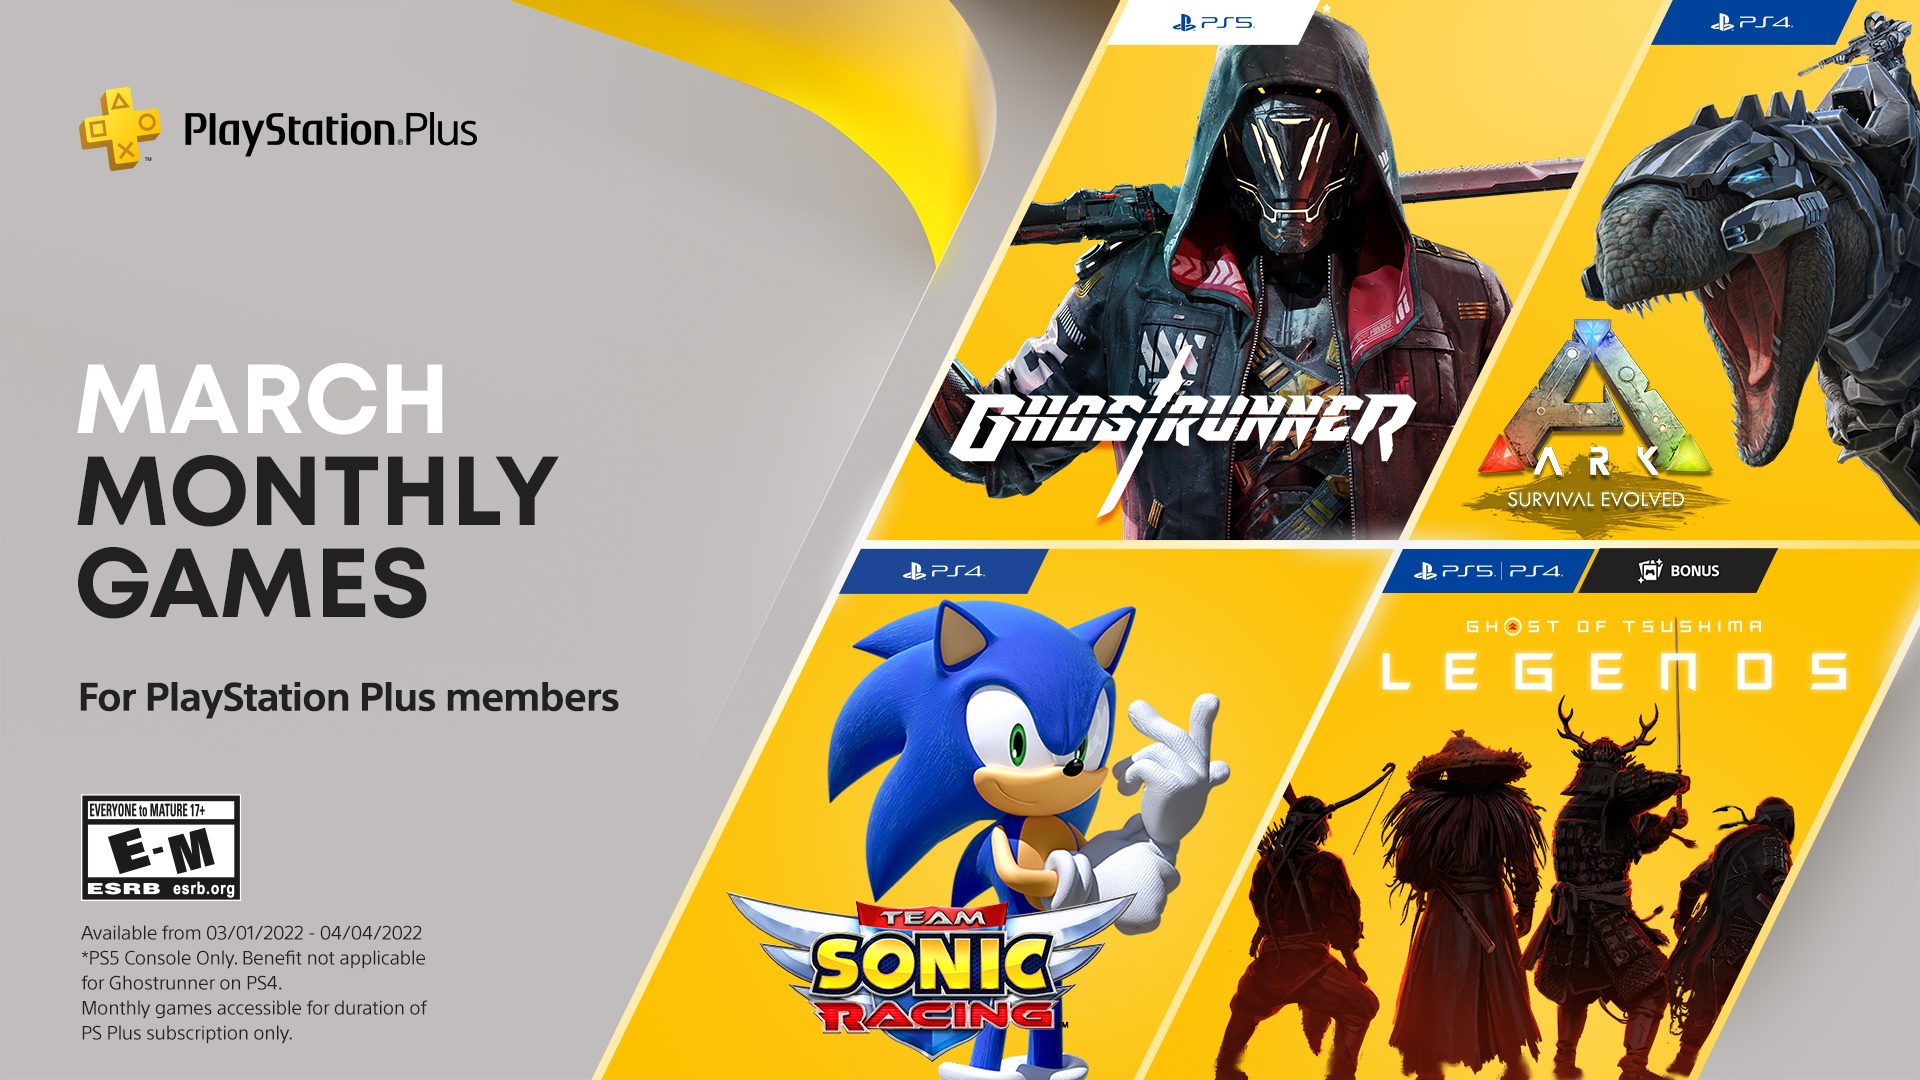 PS4/PS5 Digital Games: Ark: Survival Evolved, Ghostrunner, Team Sonic Racing & More Free (PS+ Membership Required)